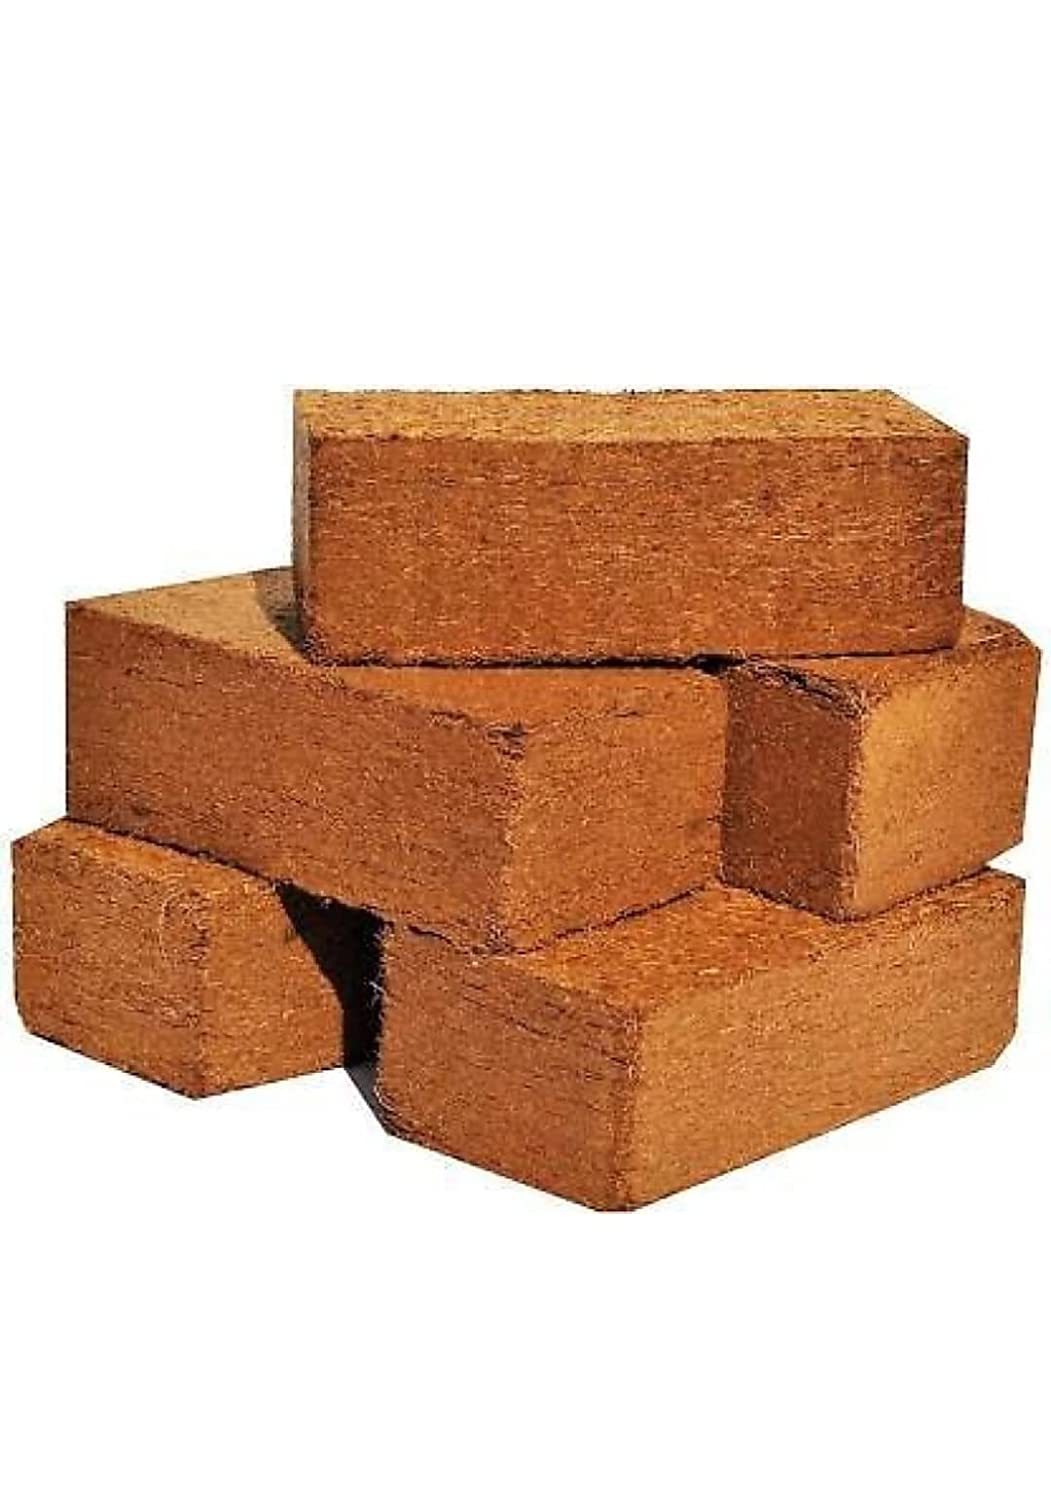 generic cocopeat brick block 650 grams expands to 3.5 kgs of coco peat powder